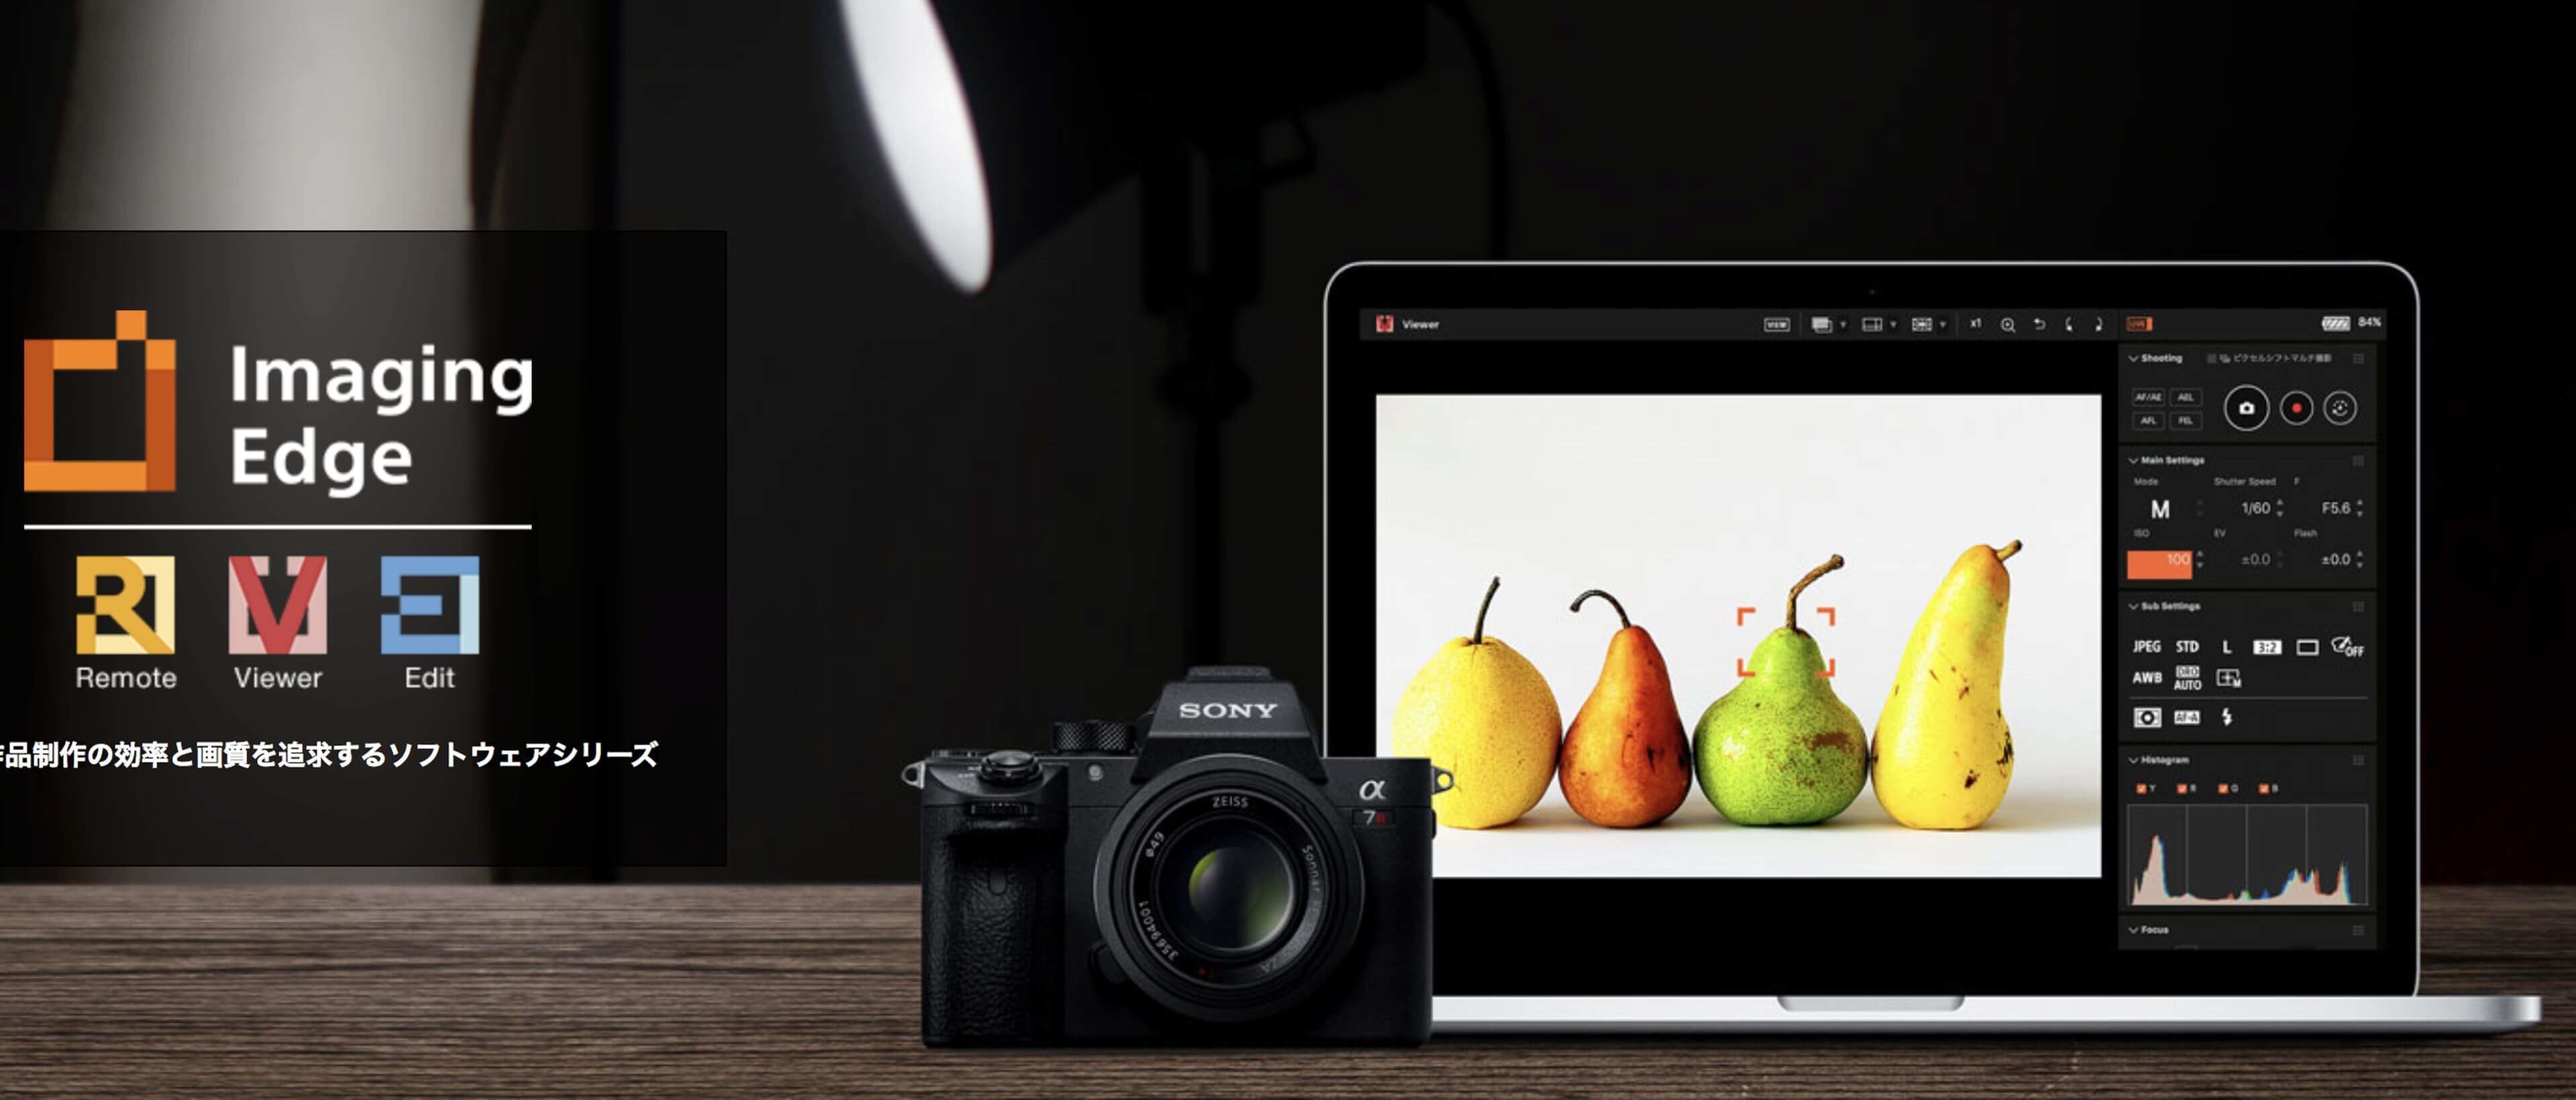 Preview Image: Sony imaging edge